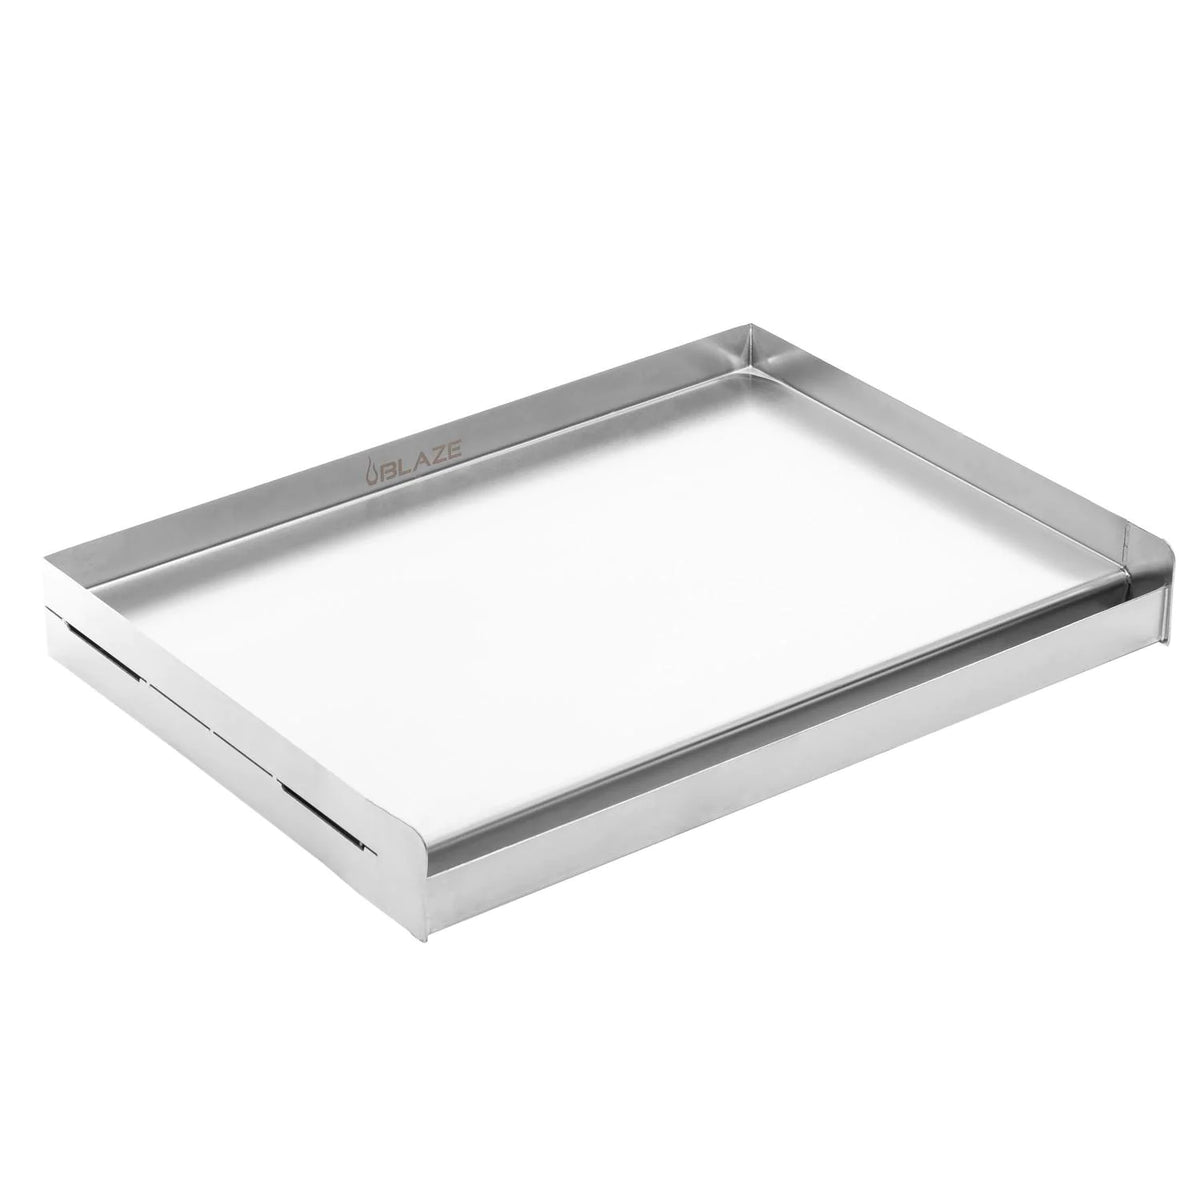 Blaze 24 Inch Griddle Plate Angled View